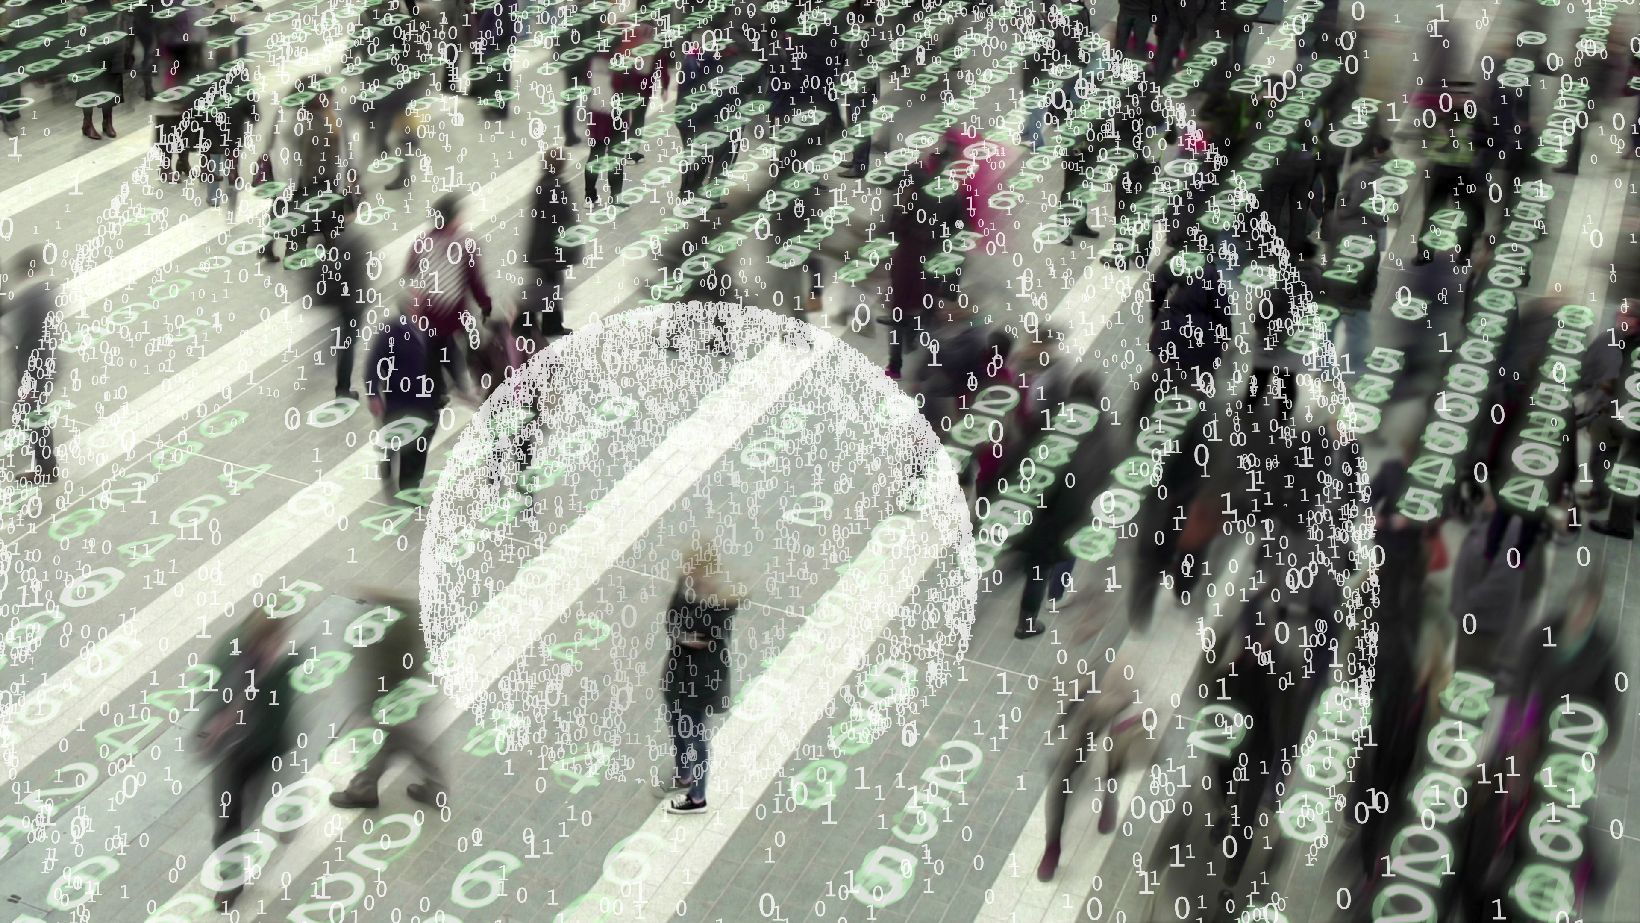 People are walking in the street while information and data is floating all around them.